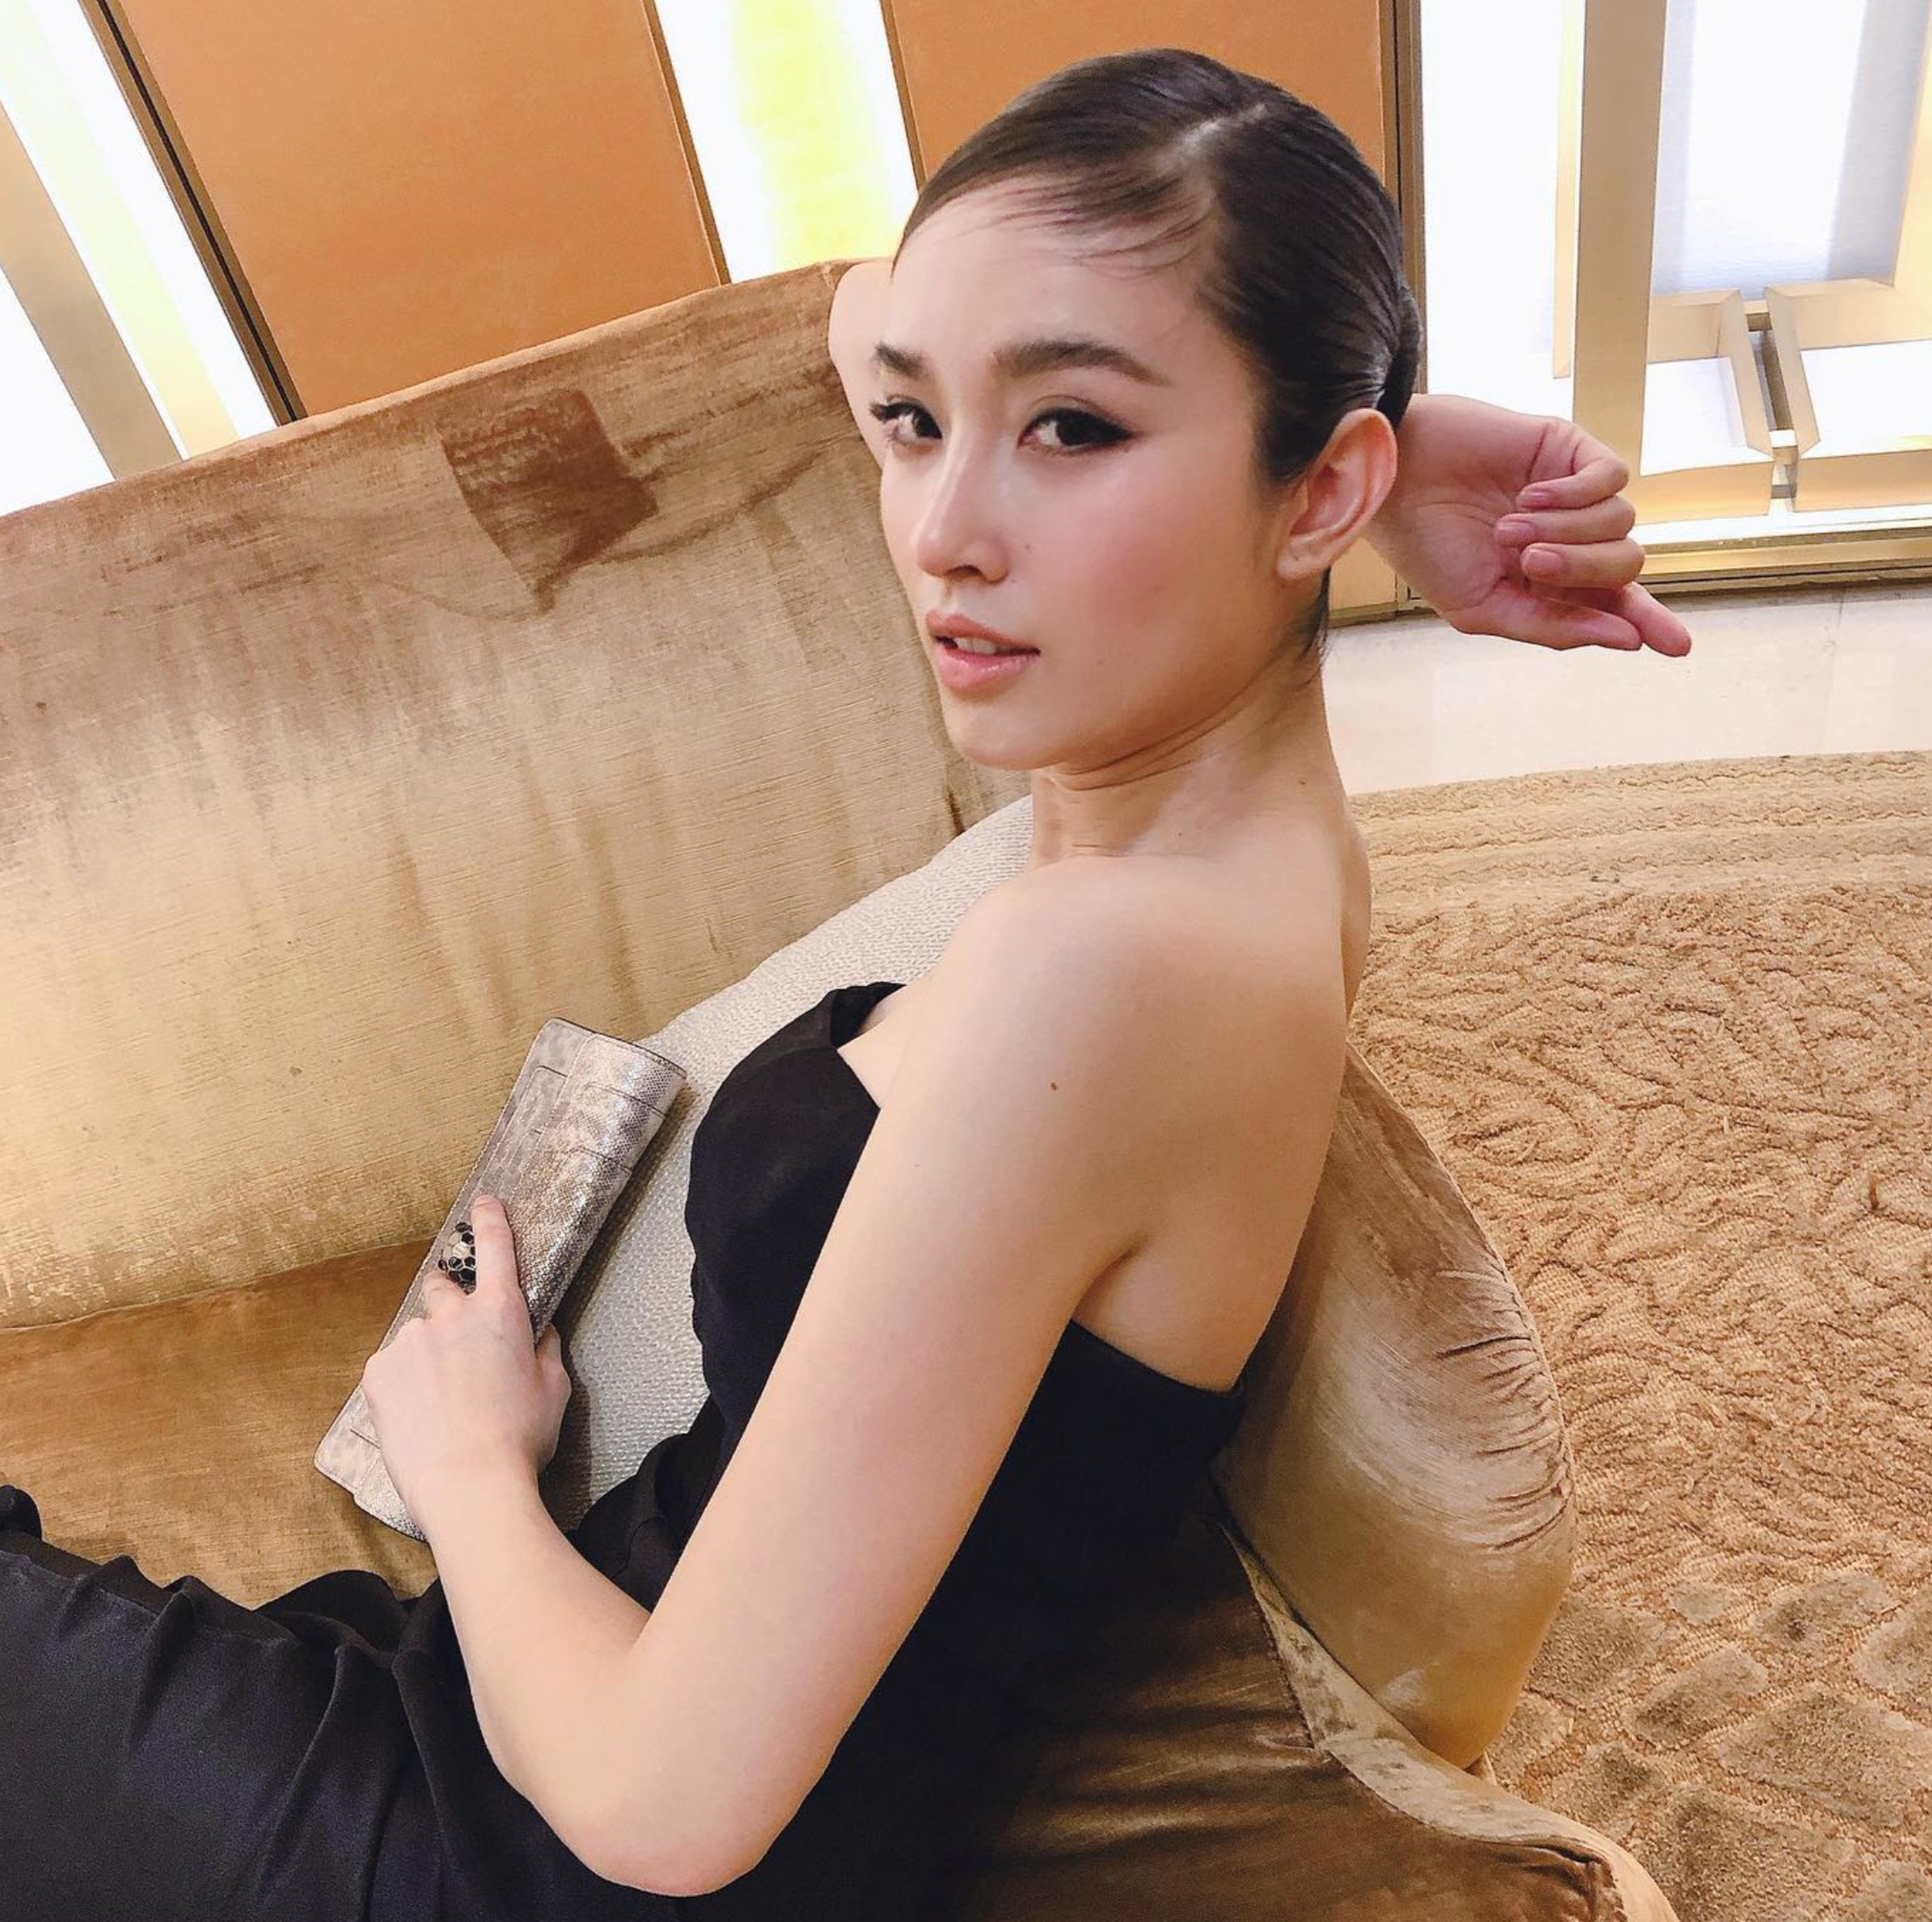 Most Beautiful Ladyboy In The World with cocks